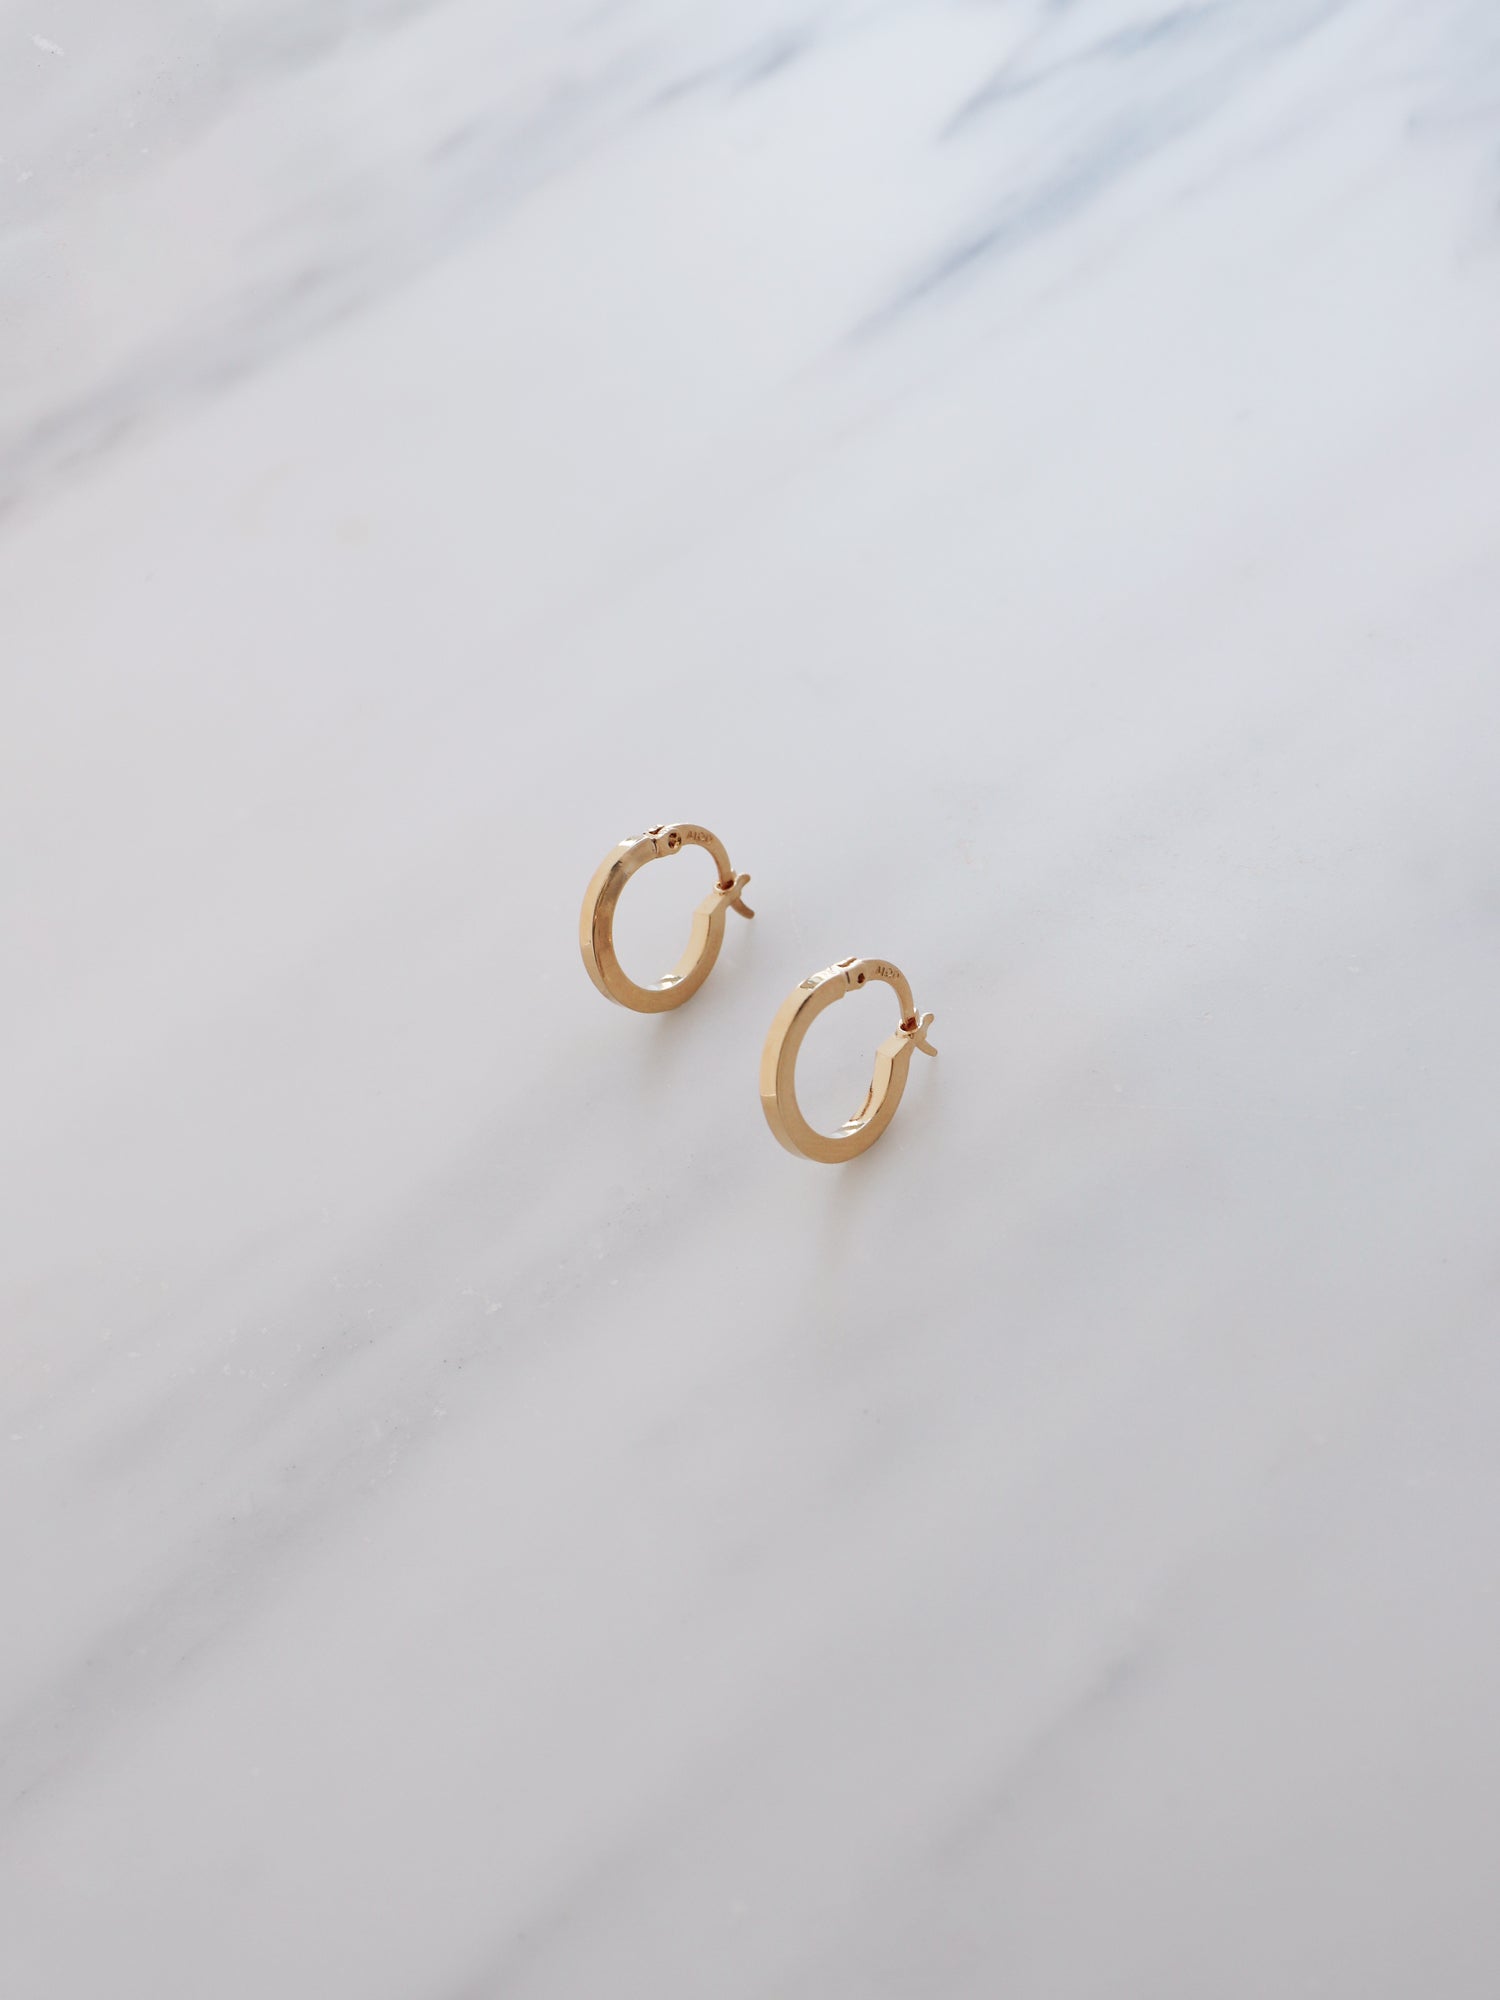 15mm hoops are made from solid brass with a very high quality 3-micron 24k gold-plating. Handmade in France, available from Wolf & Moon. 